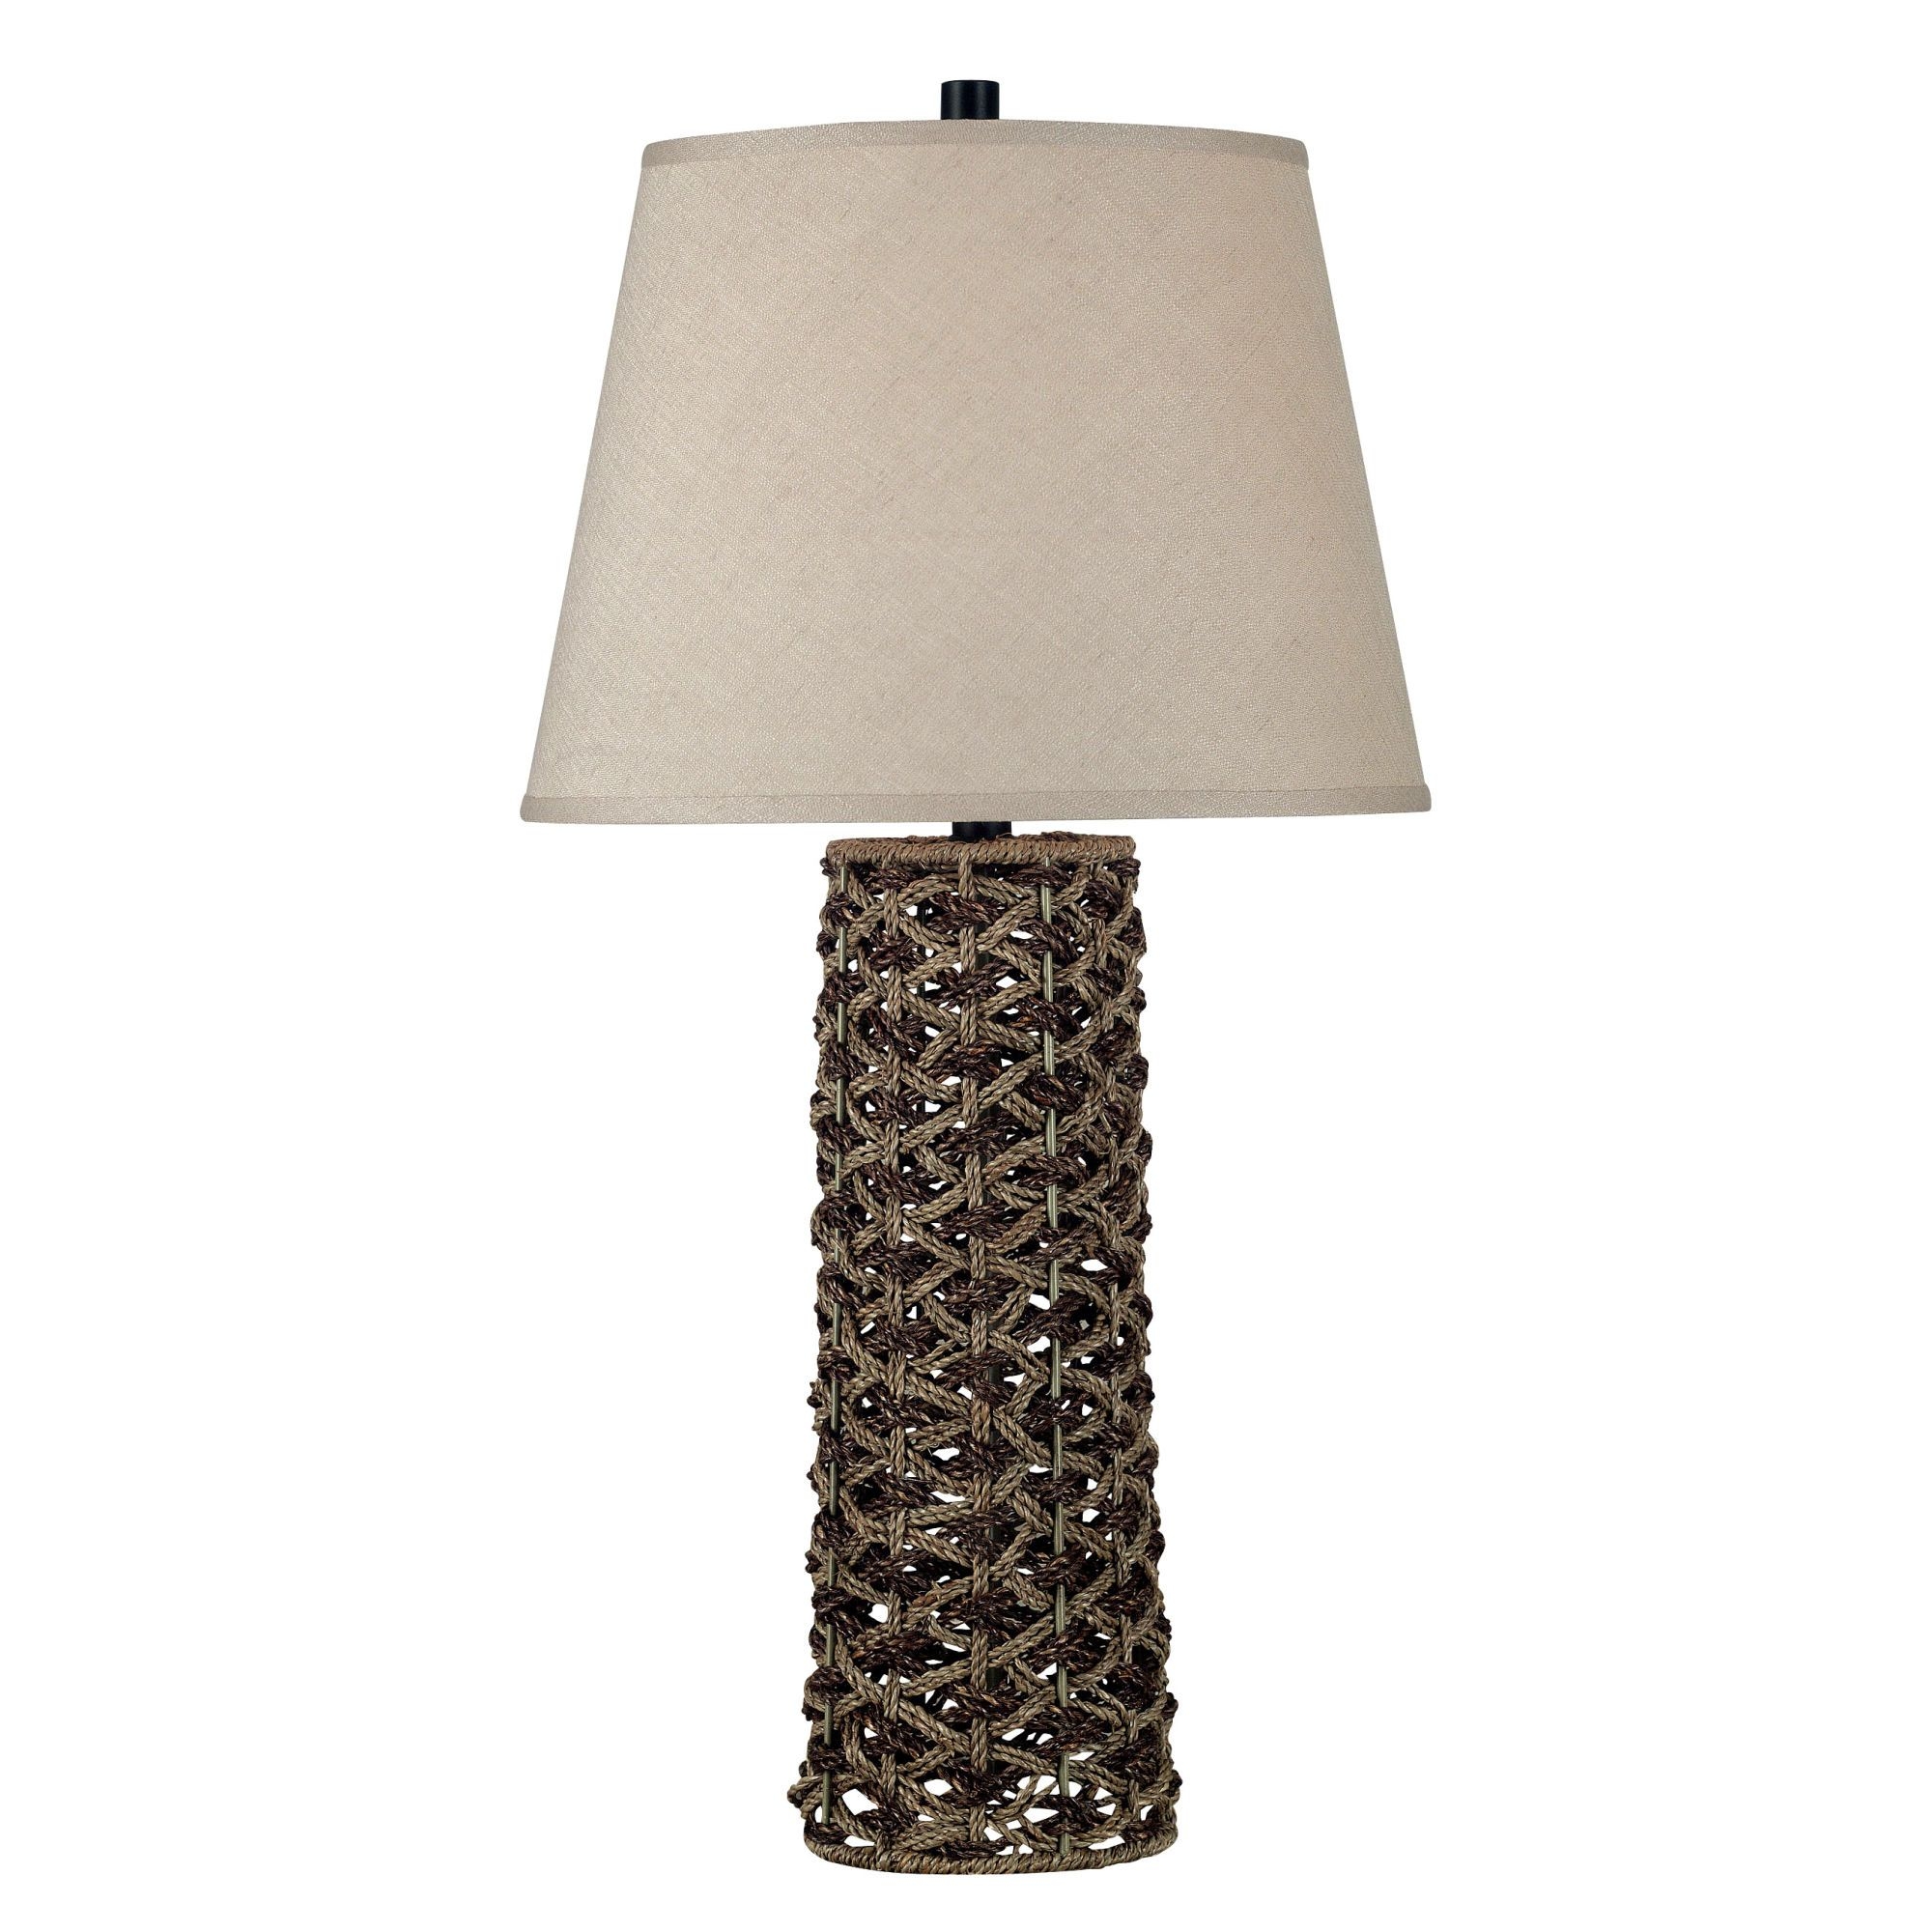 Jakarta table lamp african inspired woven fabric adds the perfect